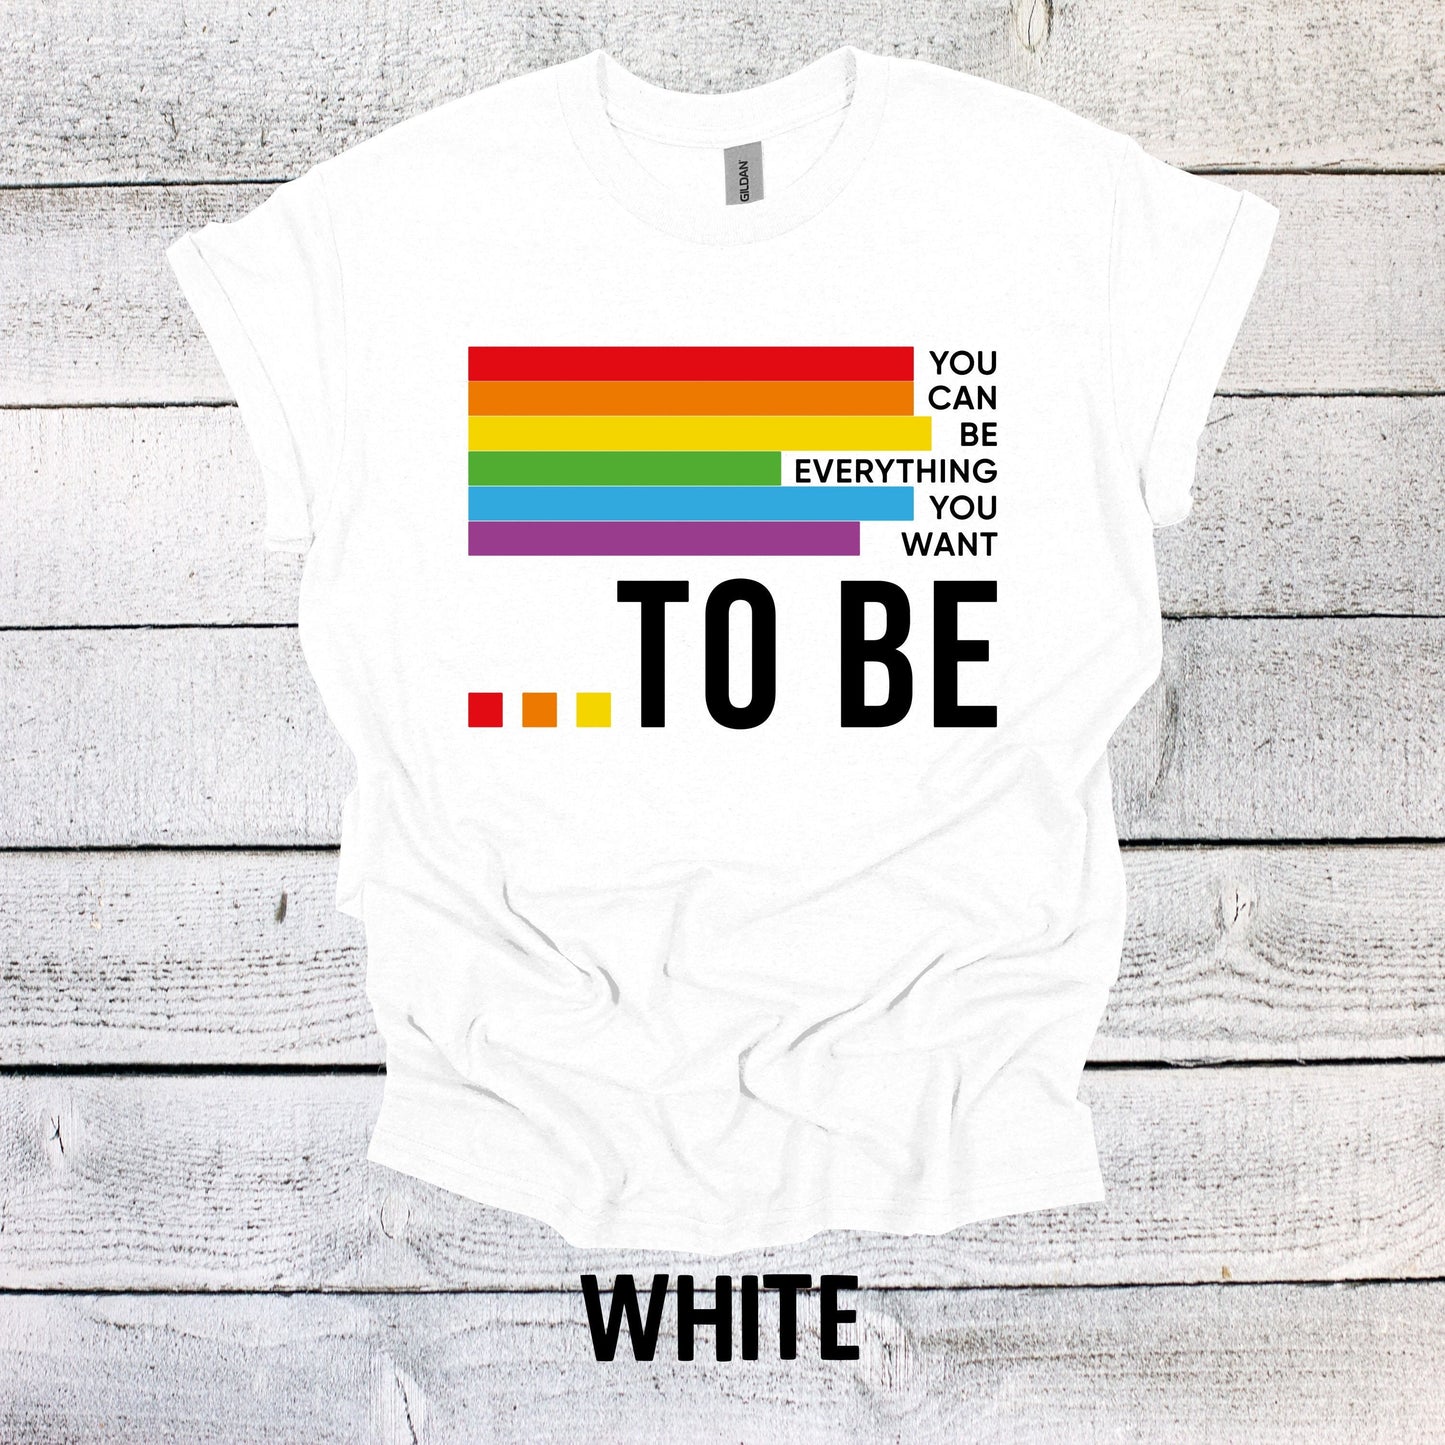 You Can Be Everything you want... to be Rainbow Pride Shirt - LGBTQ Tee for All Genders - Pride Month Apparel